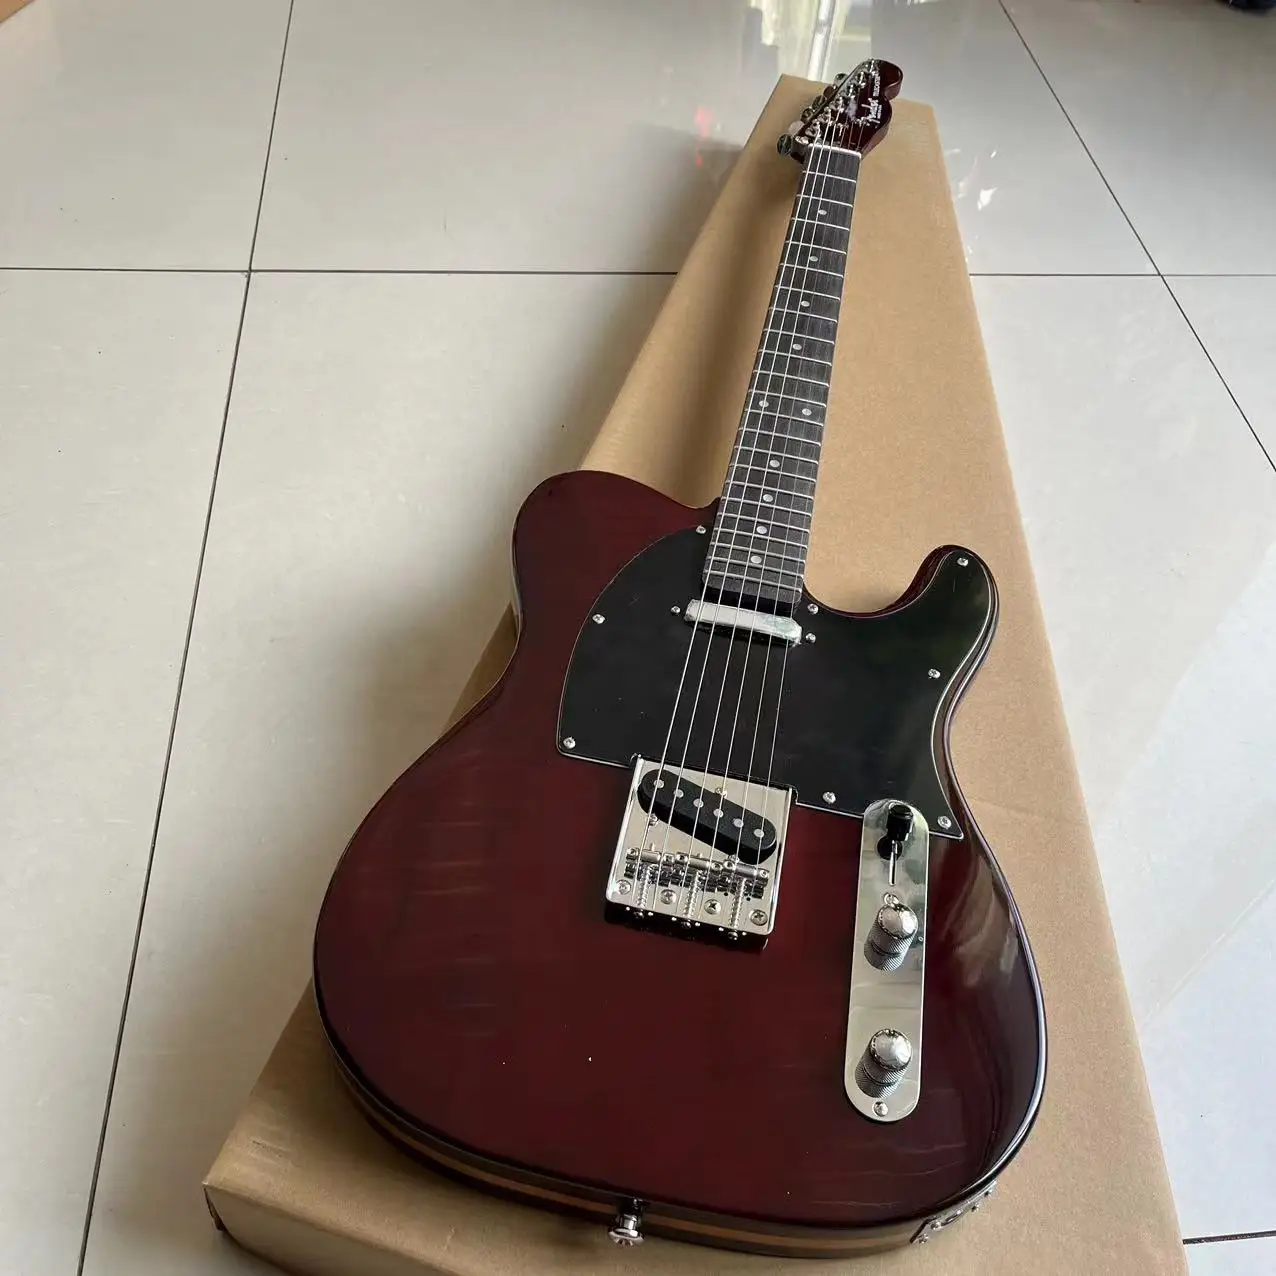 

Hot Tele electric guitar high quality basswood Body maple neck custom 6 string Guitars telecast-er style real photos DSHSDHSTH